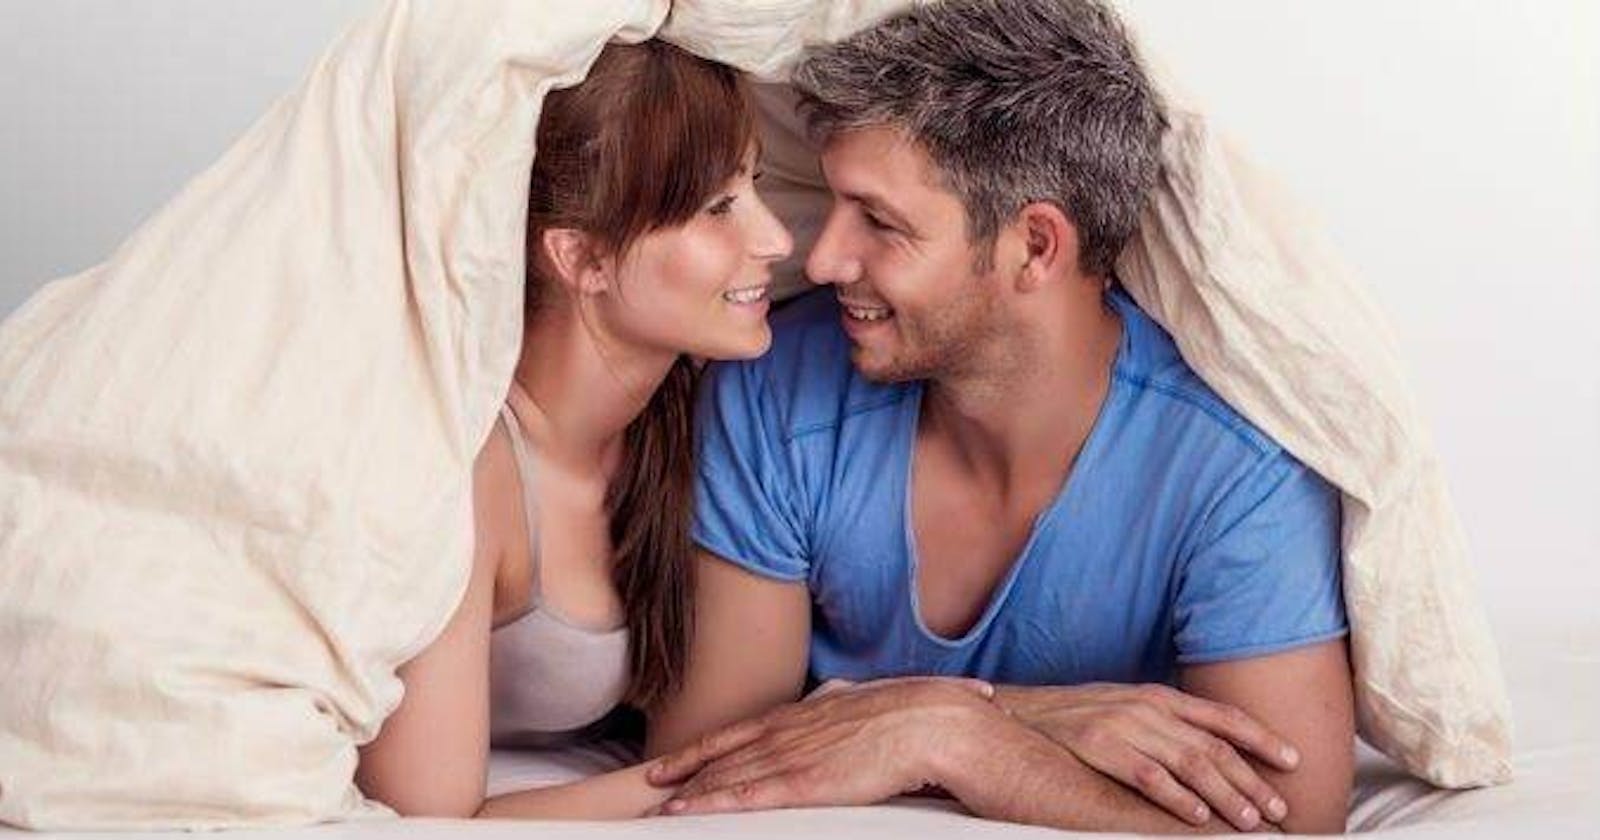 Urinoct Male Enhancement – Healthy Prostate Support That Works?